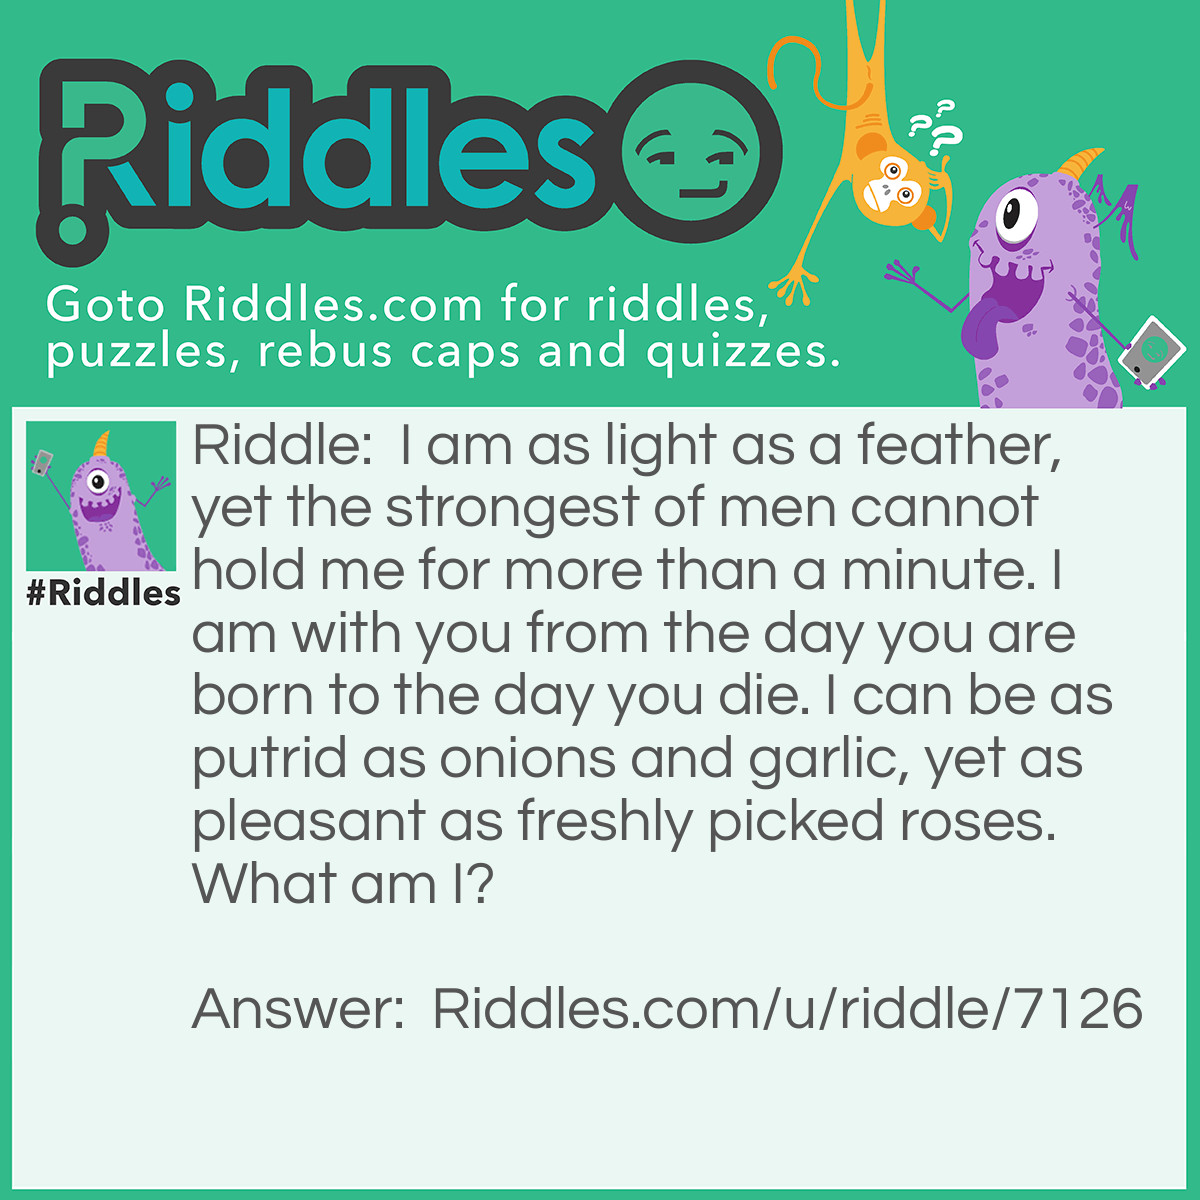 Riddle: I am as light as a feather, yet the strongest of men cannot hold me for more than a minute. I am with you from the day you are born to the day you die. I can be as putrid as onions and garlic, yet as pleasant as freshly picked roses. What am I? Answer: Breath.